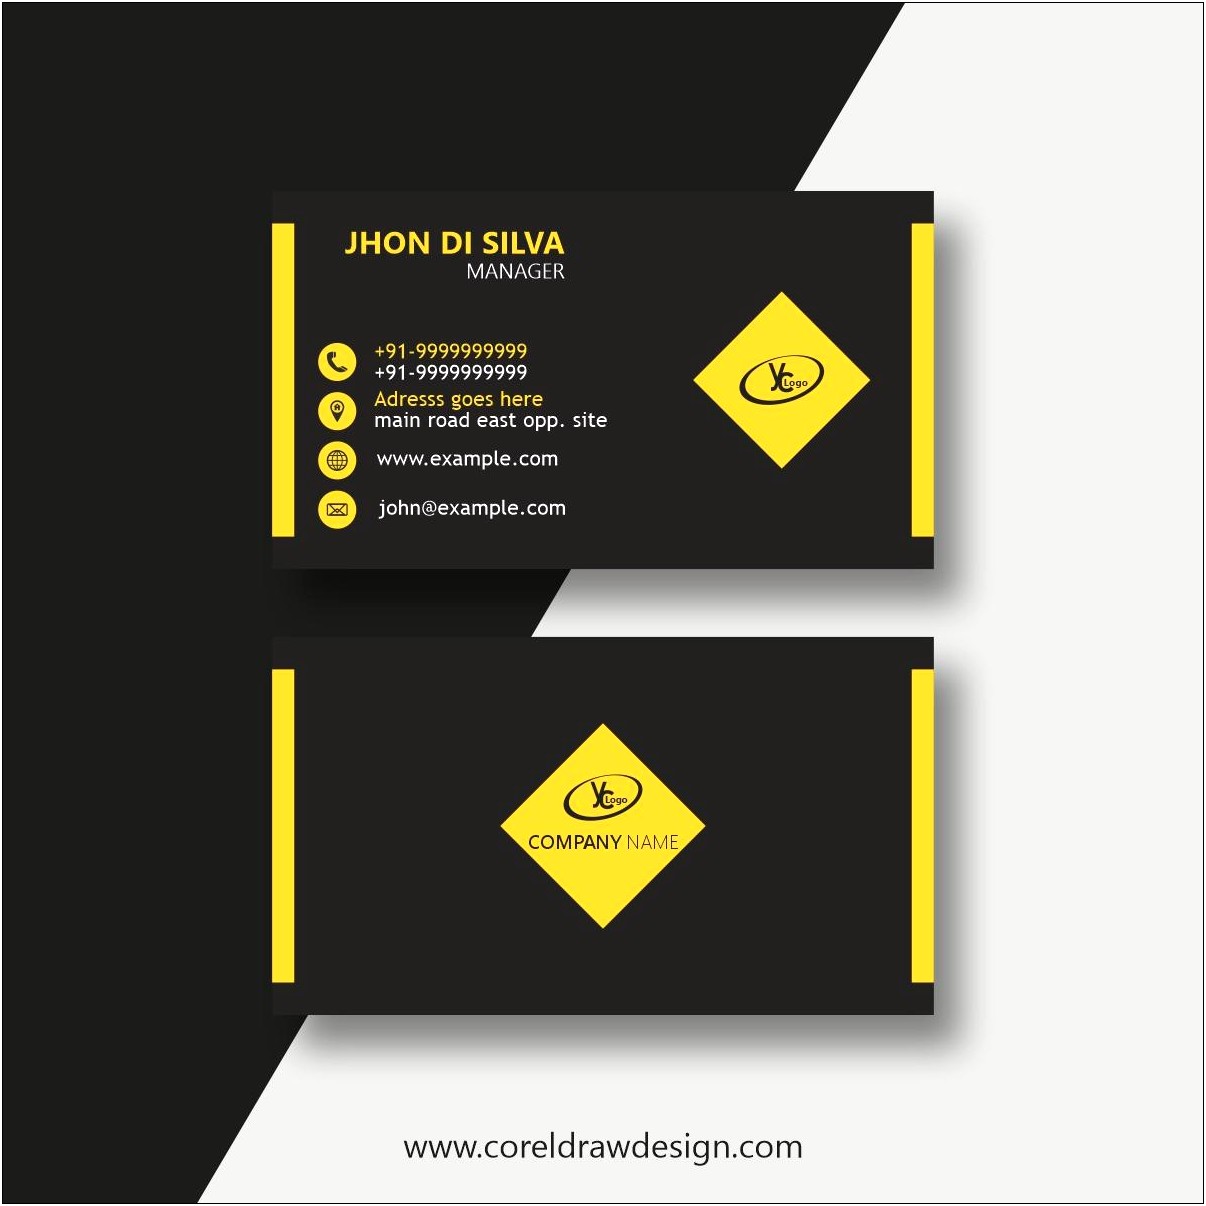 Corel Draw Business Card Templates Cdr Free Download